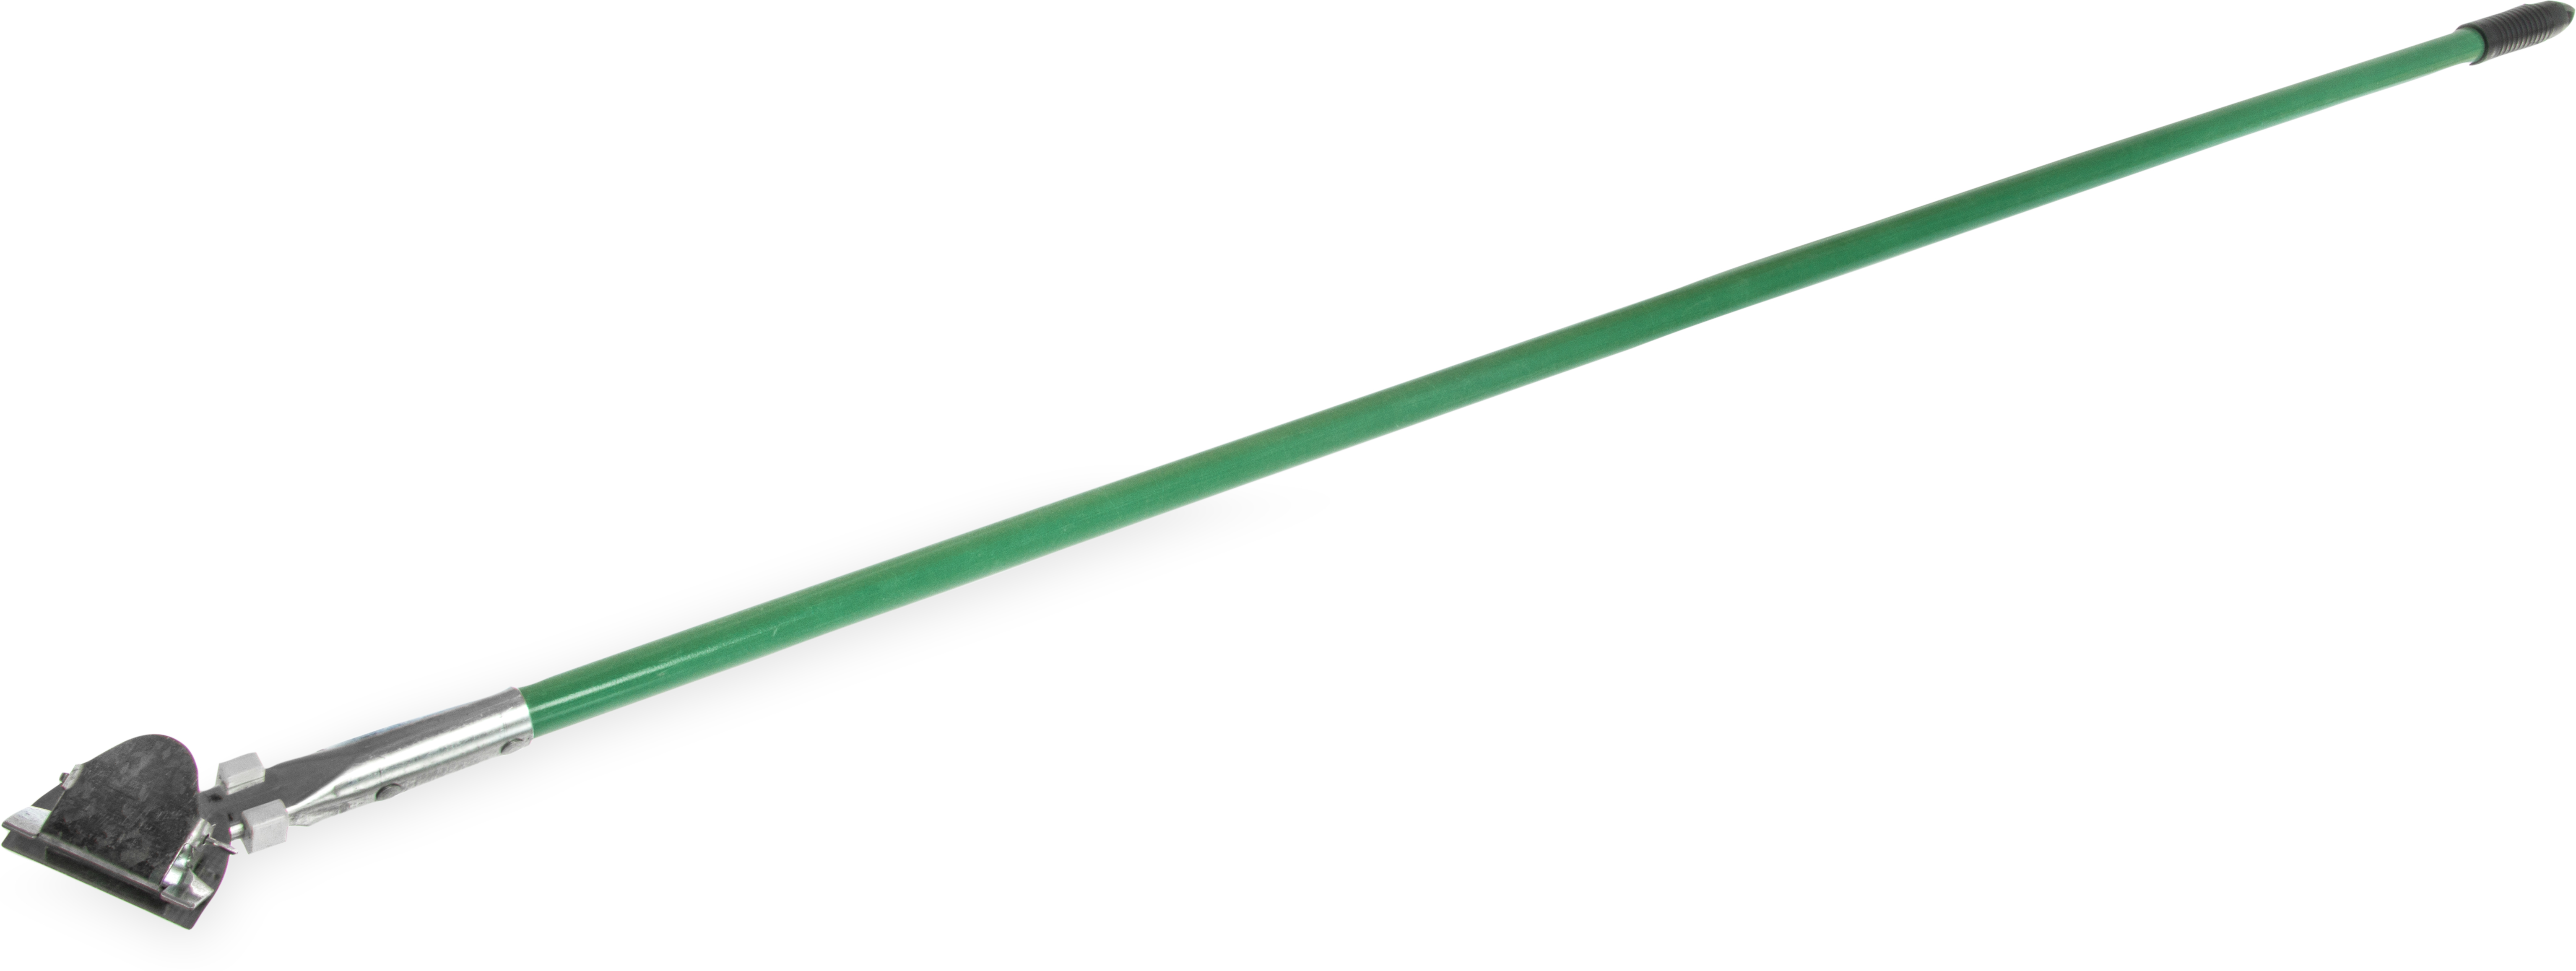 Fiberglass Dust Mop Handle with Clip-On Connector 60 - Green